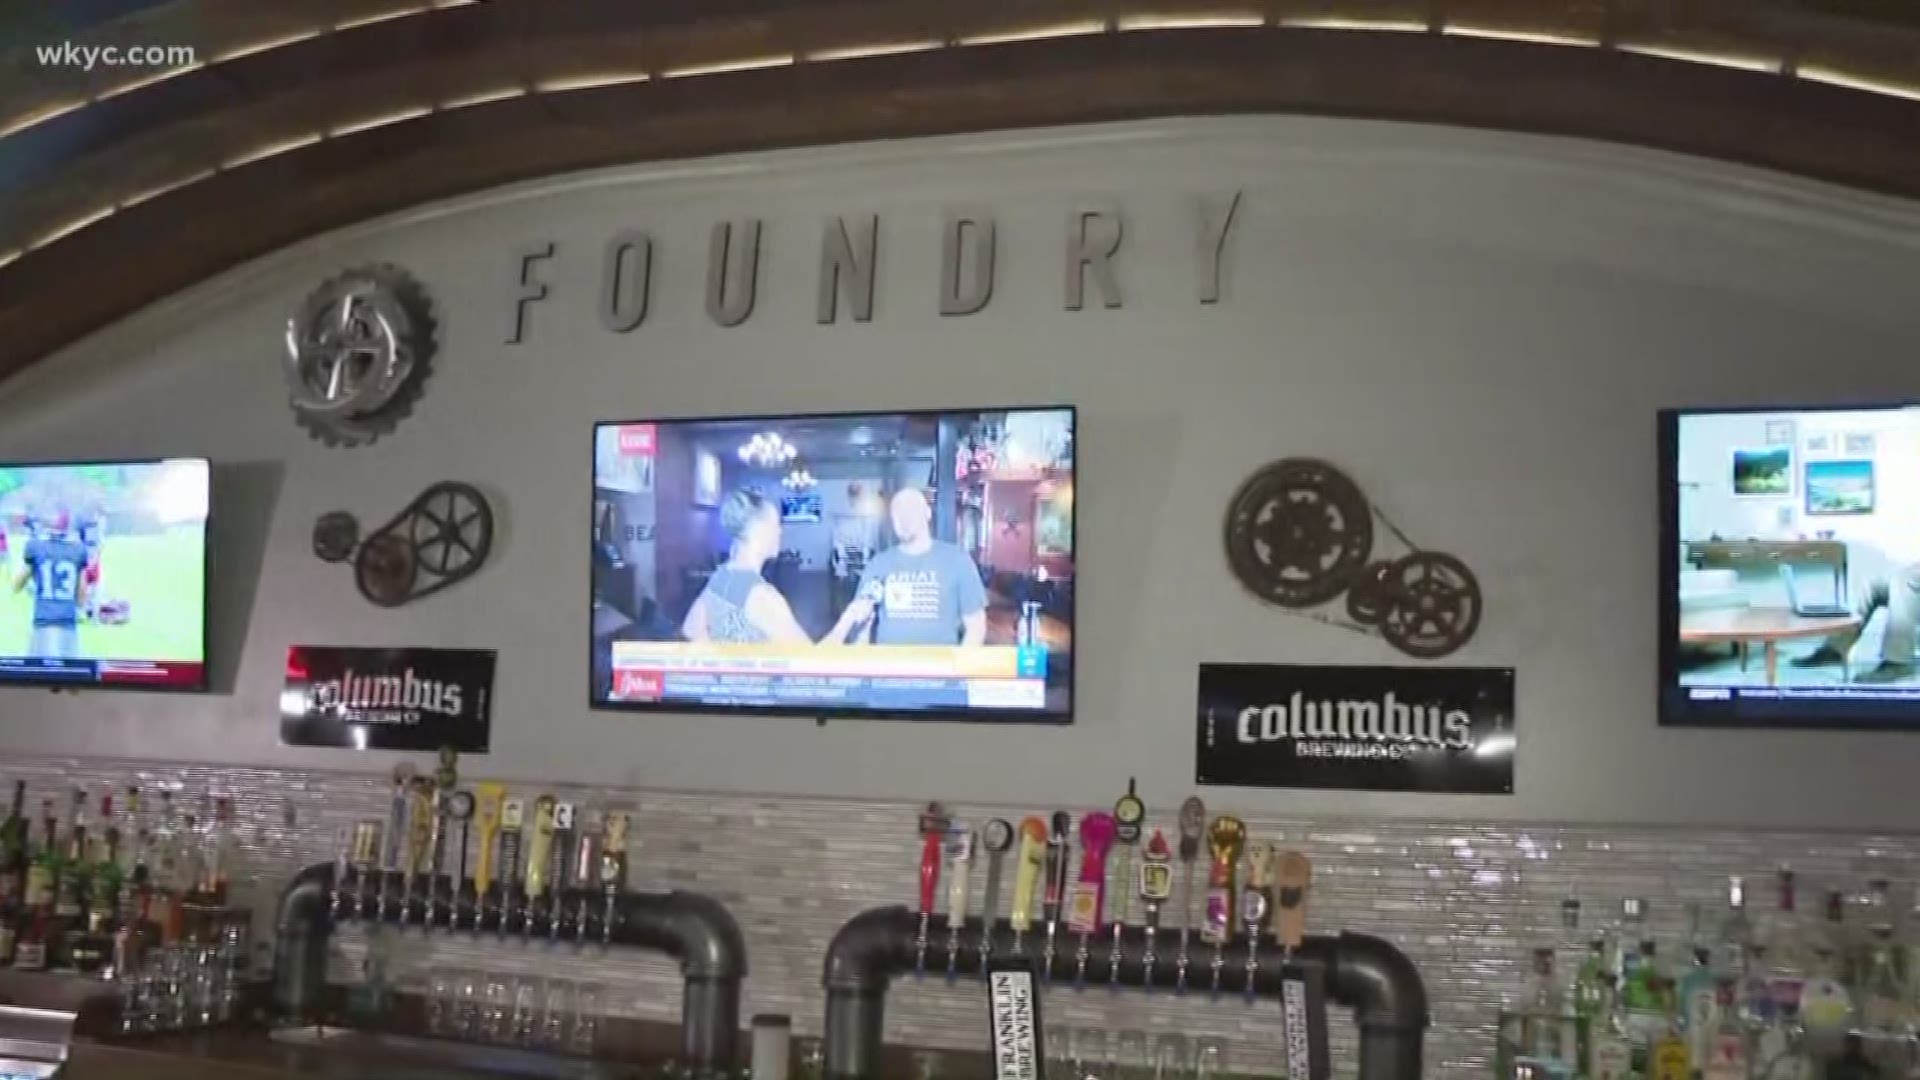 Aug. 29, 2018: WKYC's Dorsena Drakeford gives us an inside look at the Foundry restaurant in Elyria.